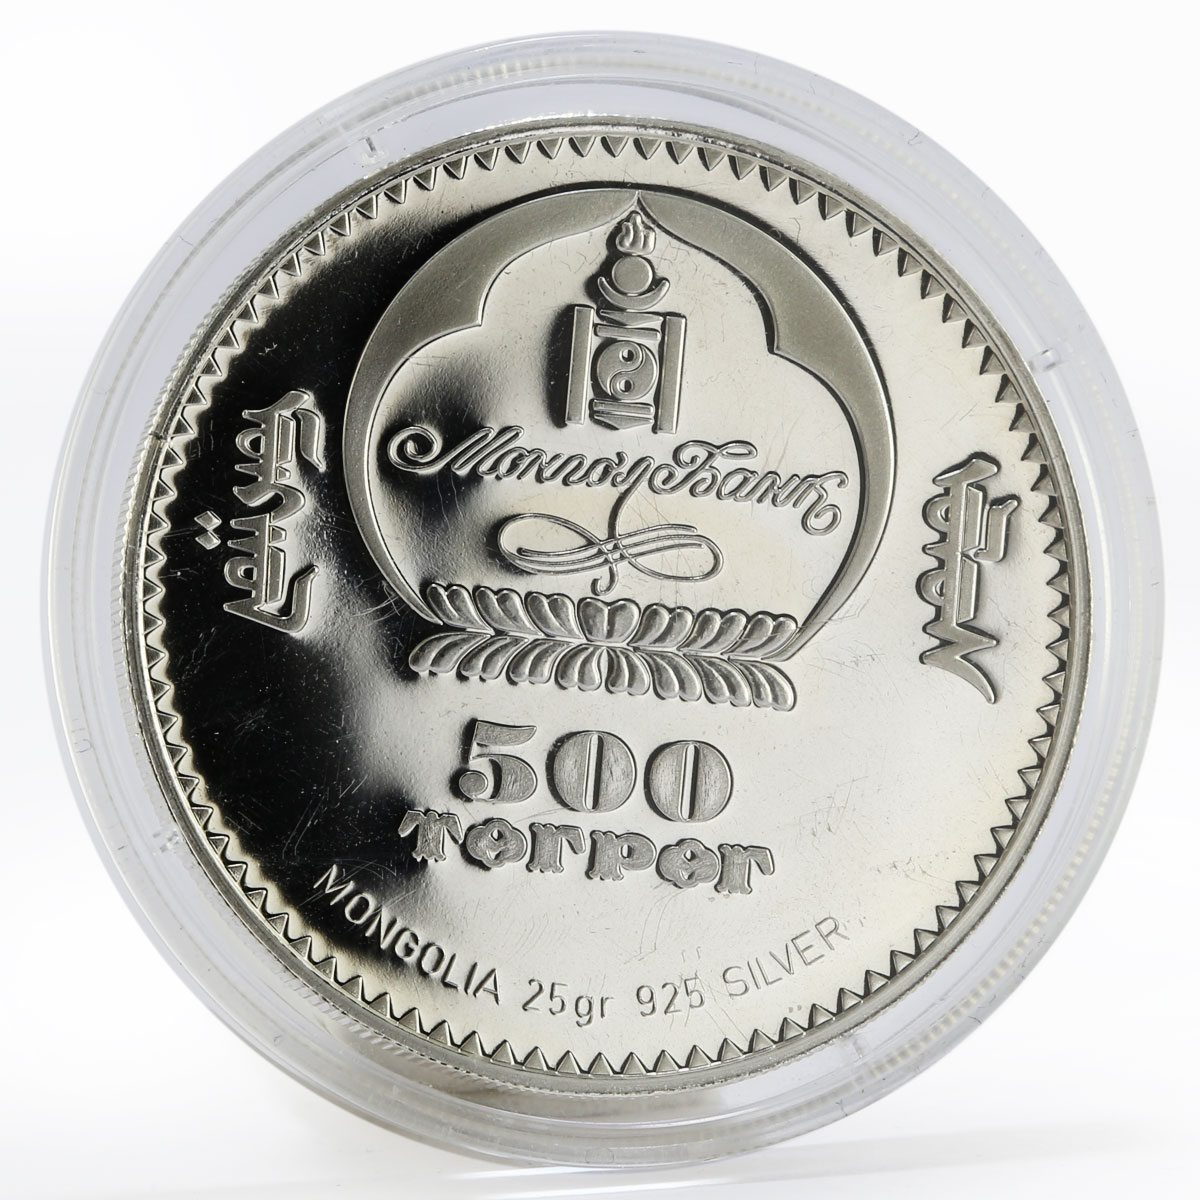 Mongolia 500 togrog 800th Anniversary of Great Mongol Empire silver coin 2006